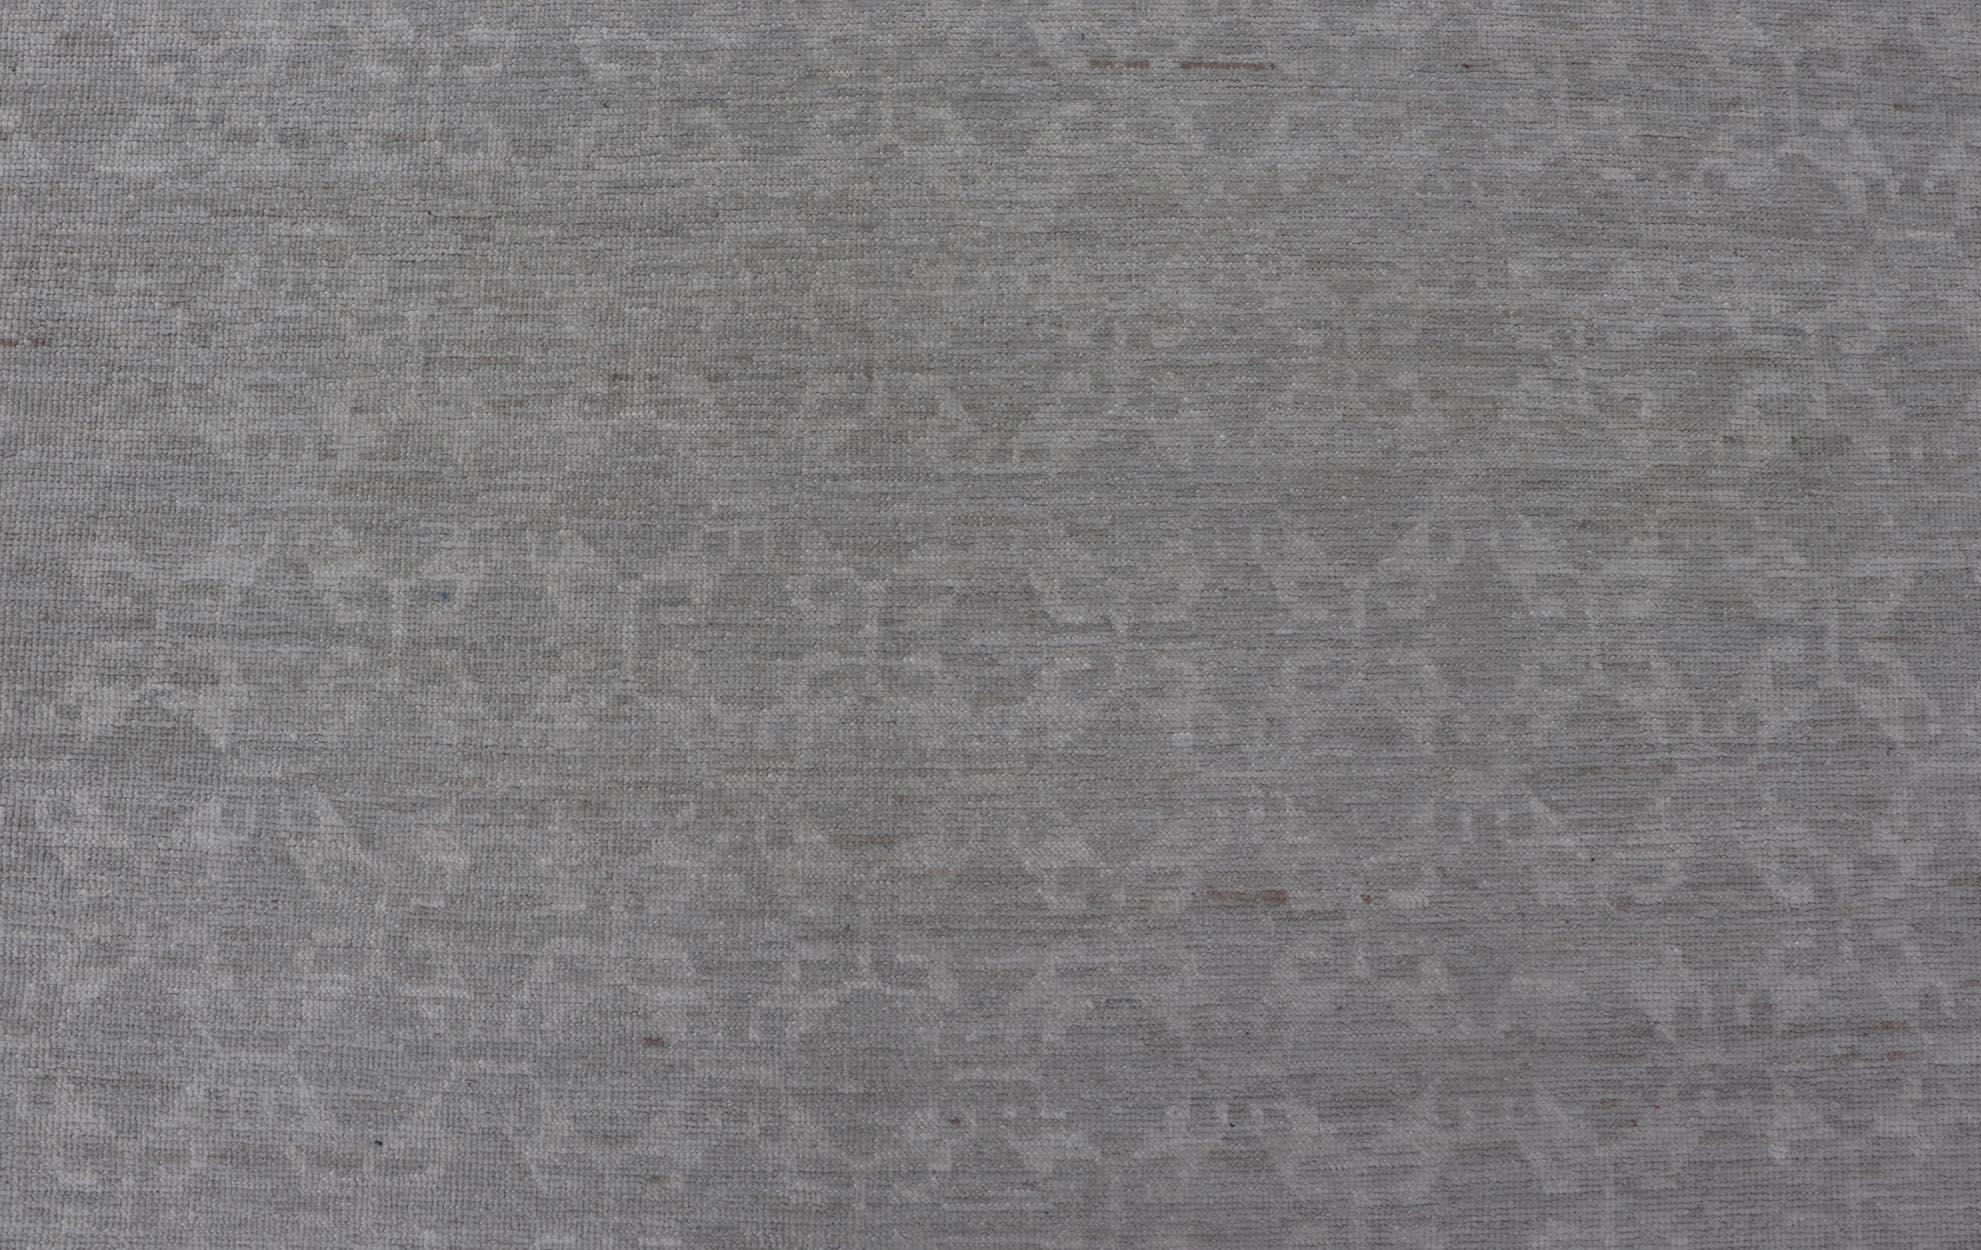 Modern All-Over Tribal Motif Khotan Area Rug in Muted Gray and Cream Tones In New Condition For Sale In Atlanta, GA